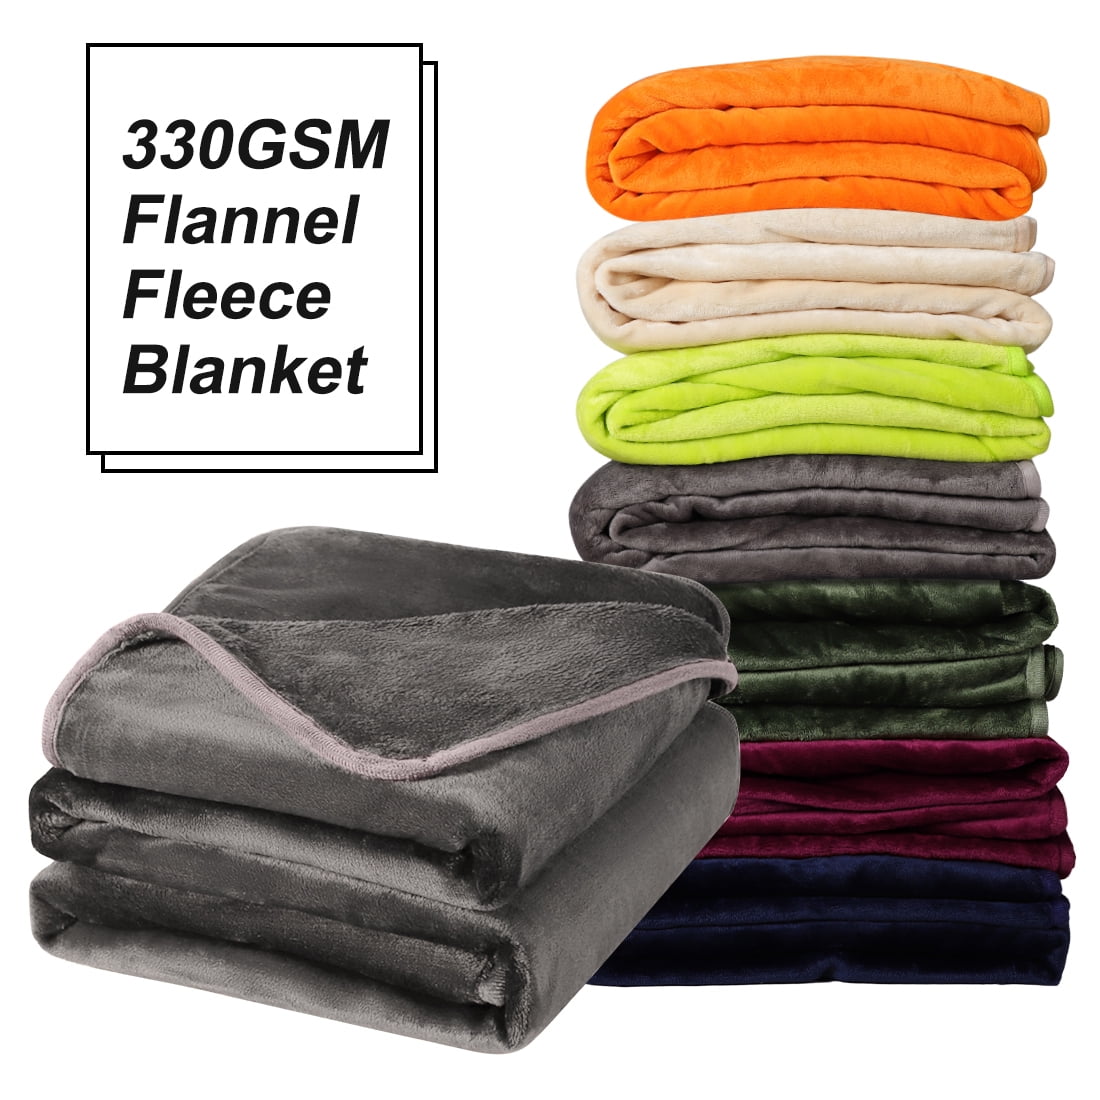 Polished Princess Ultra-Soft Micro Fleece Blanket Flannel Fleece Soft and Warm Plush Sofa Bed Couch Living Room 